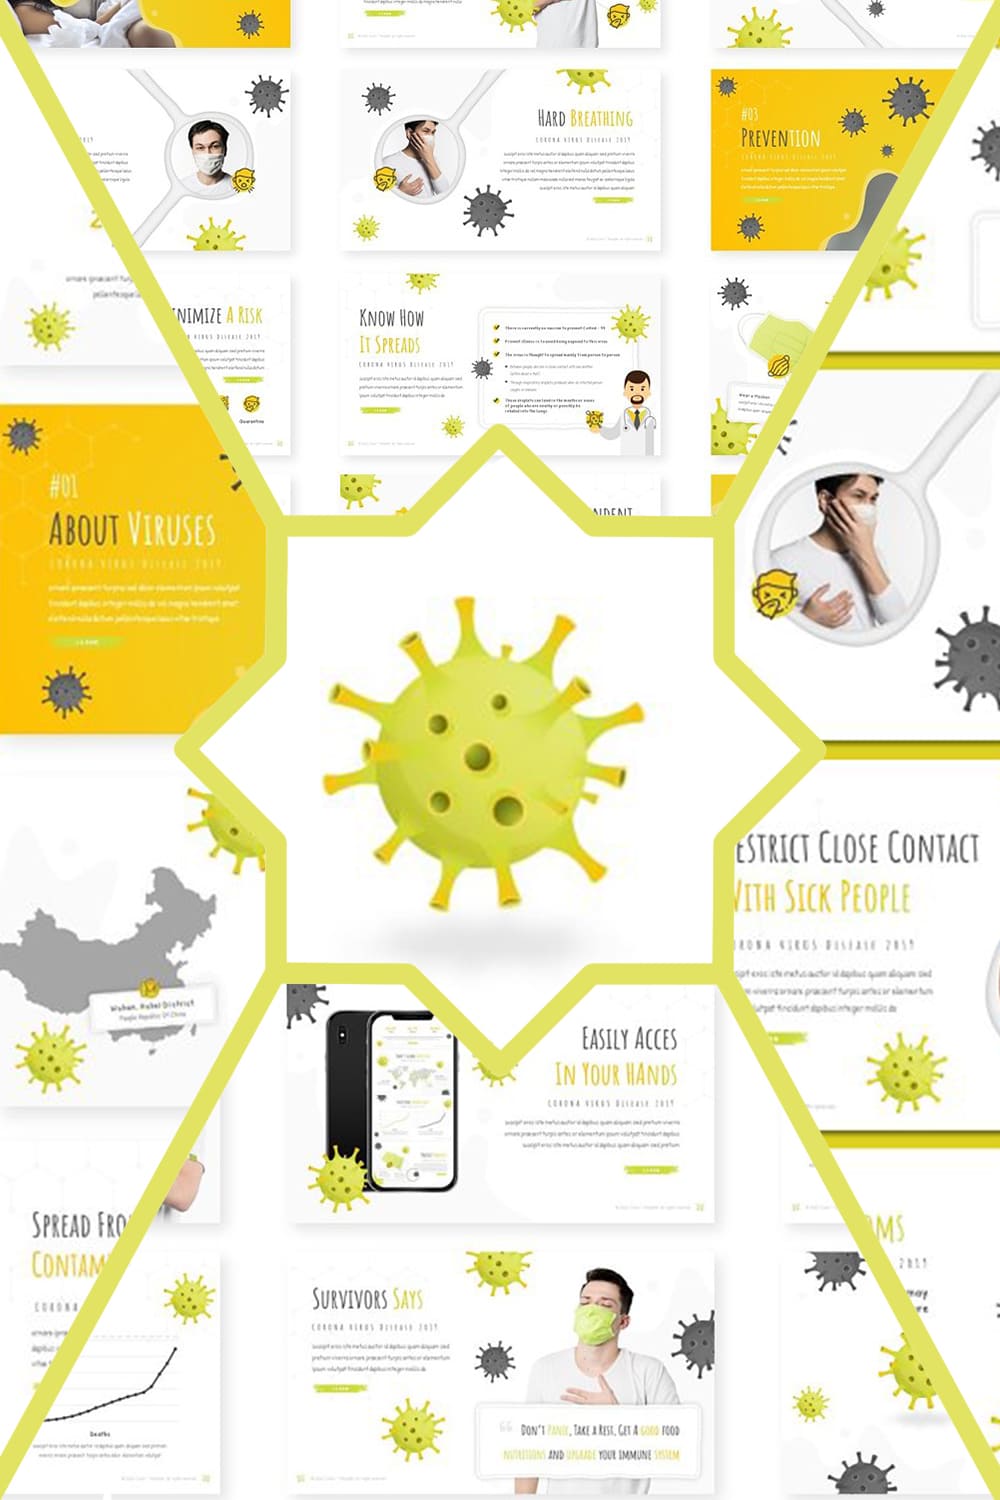 The interactive template with microbe illustrations.